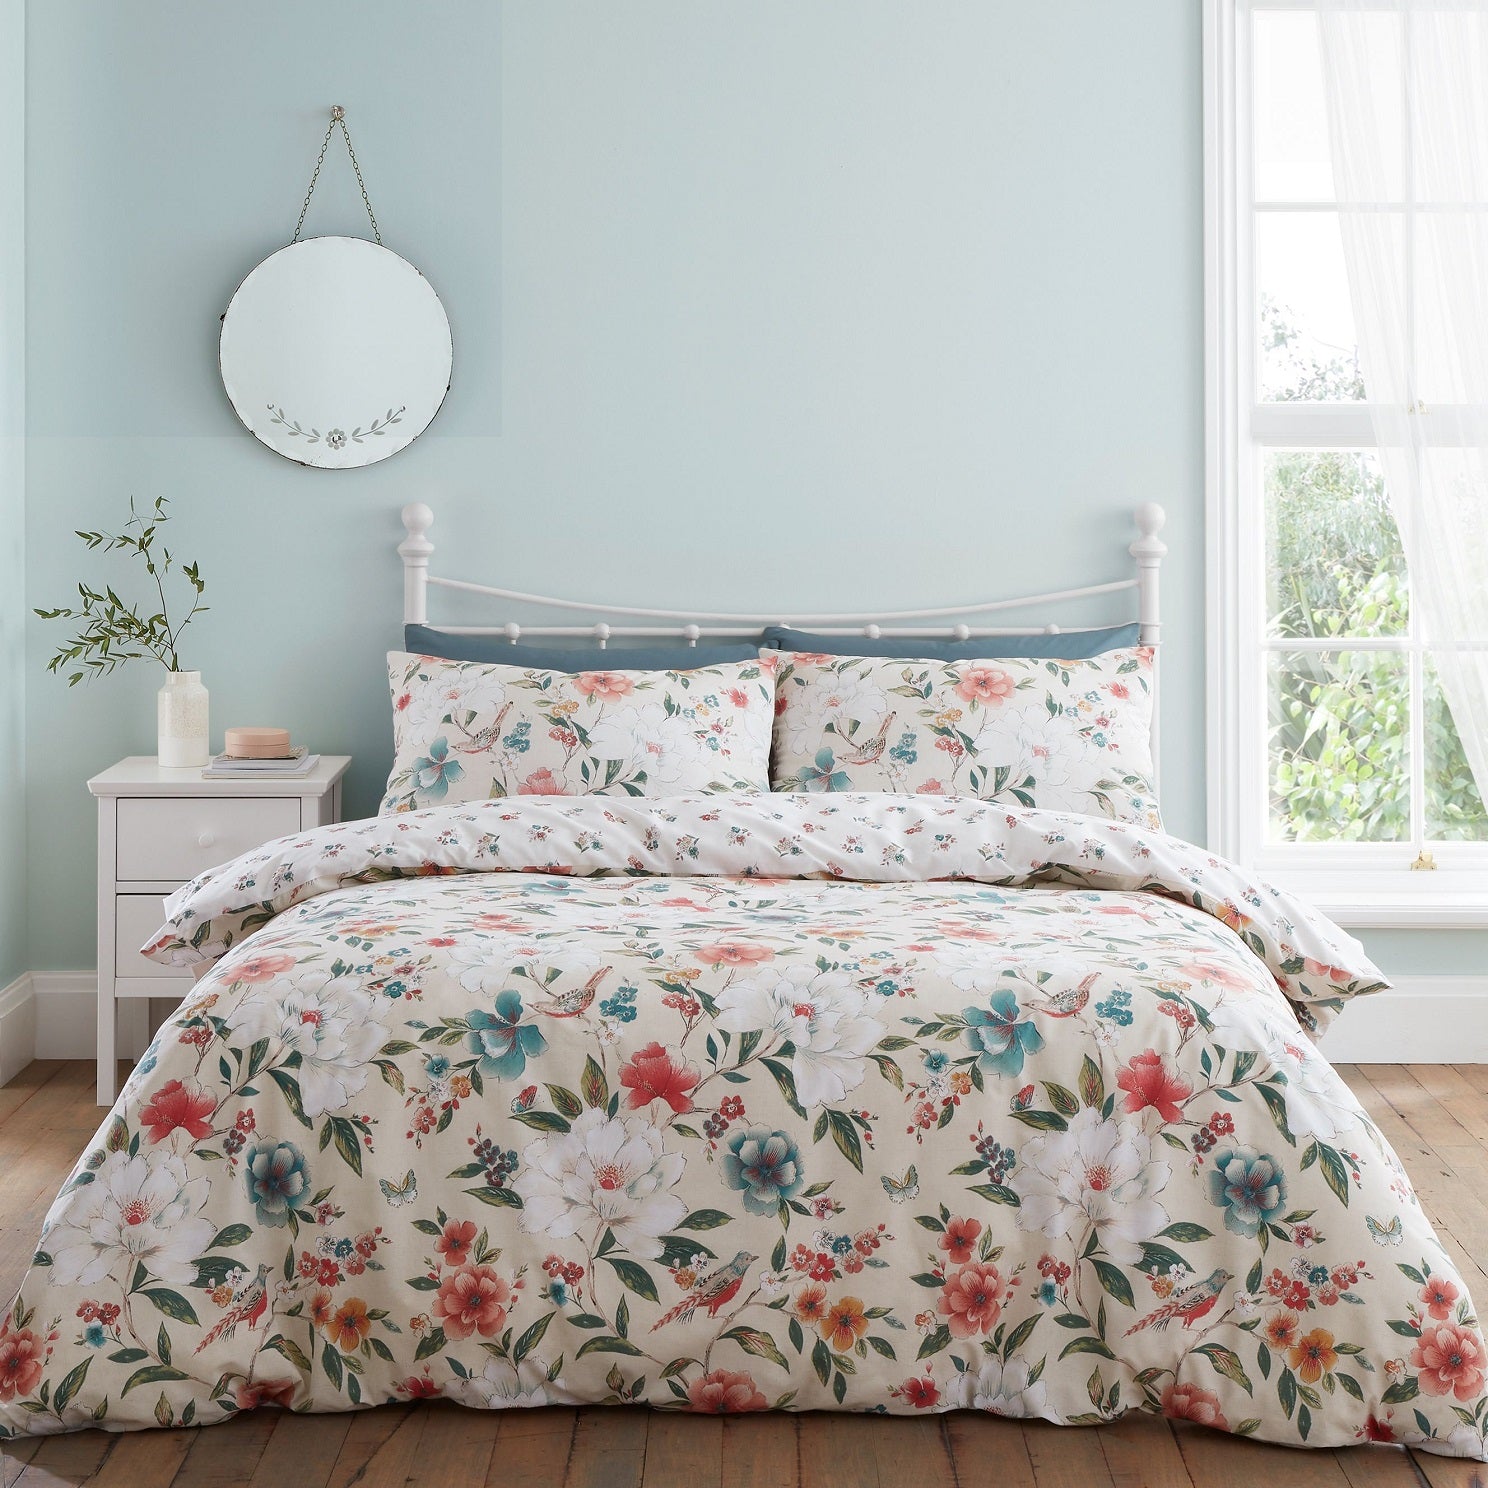 Catherine Lansfield Pippa Floral Birds Duvet Cover Set, King, Natural